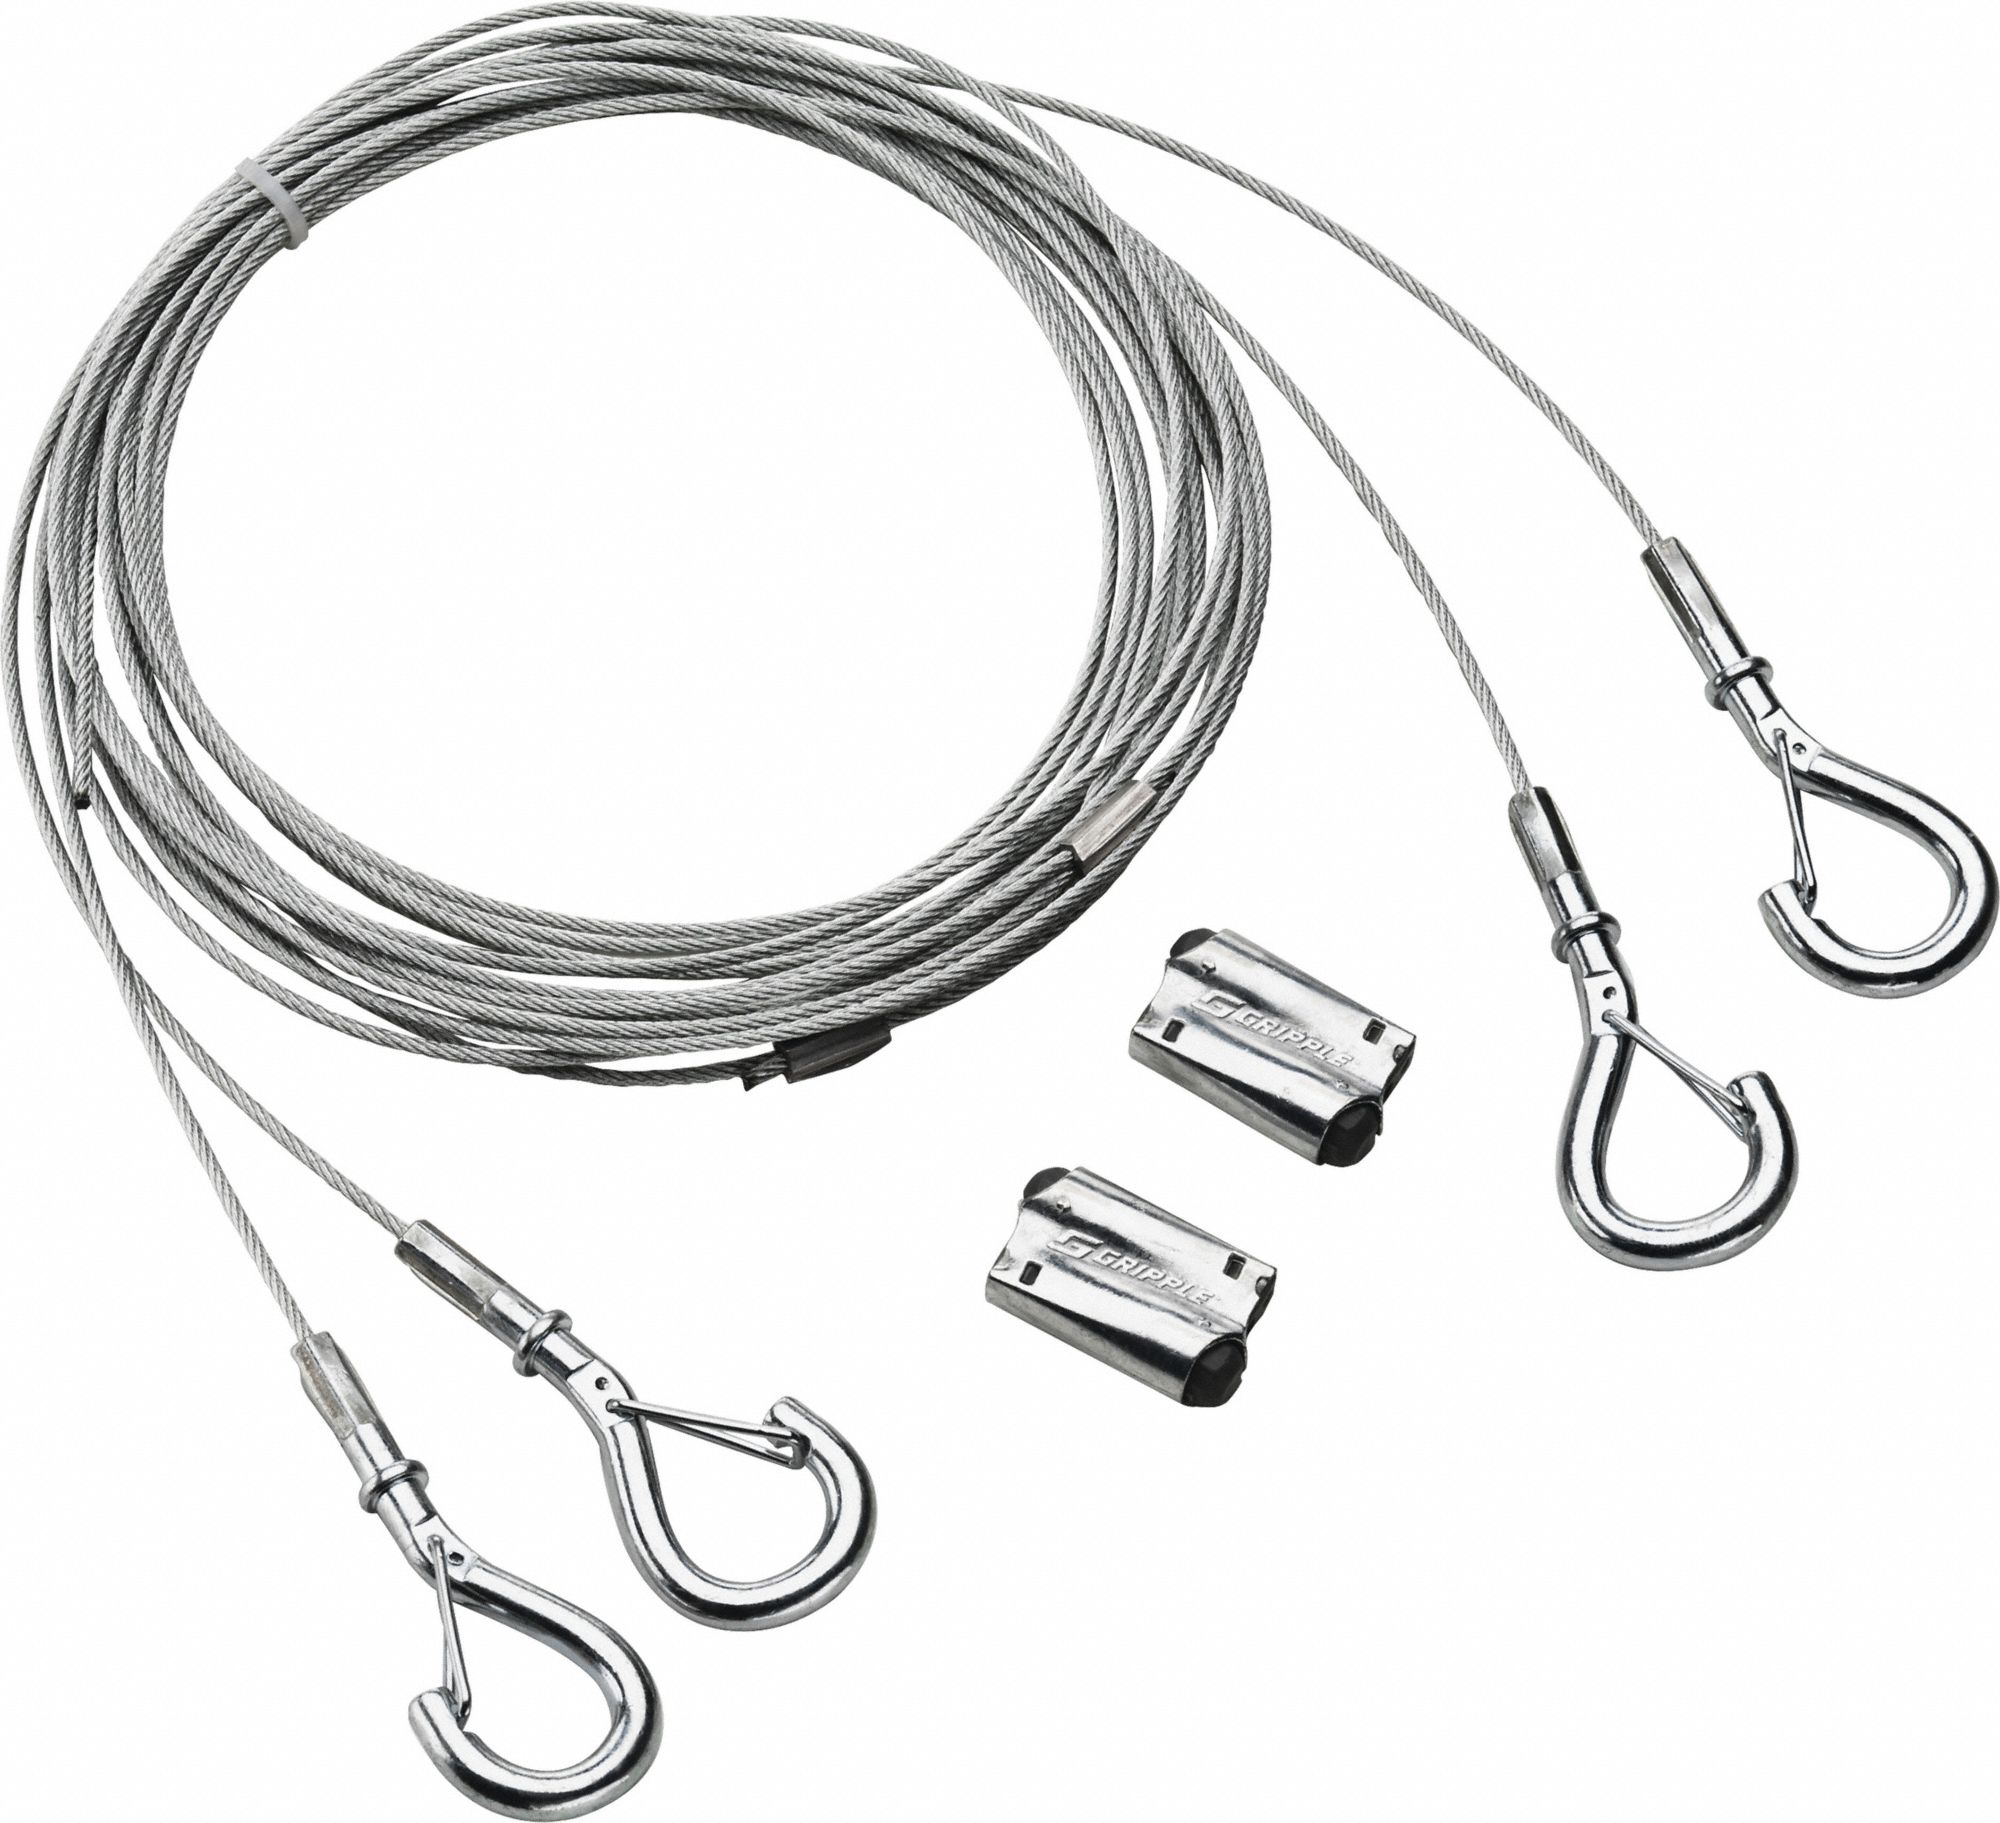 LITHONIA LIGHTING IBAC120 M20 Aircraft Cable Hanging Kit 25 pieces total 